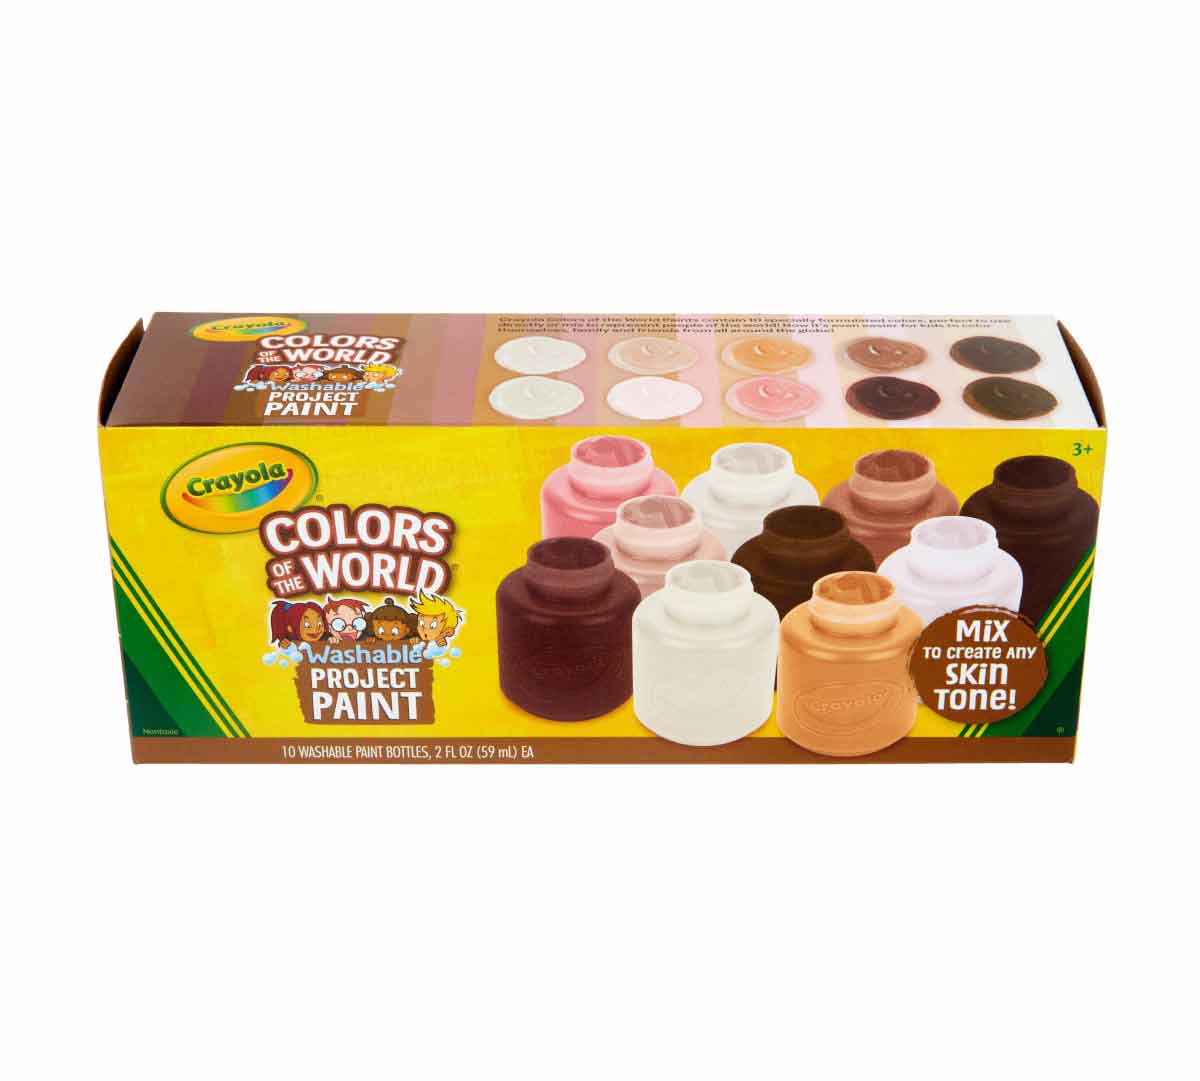 Colors of The World Washable Paint, 9 Ct, Crayola.com